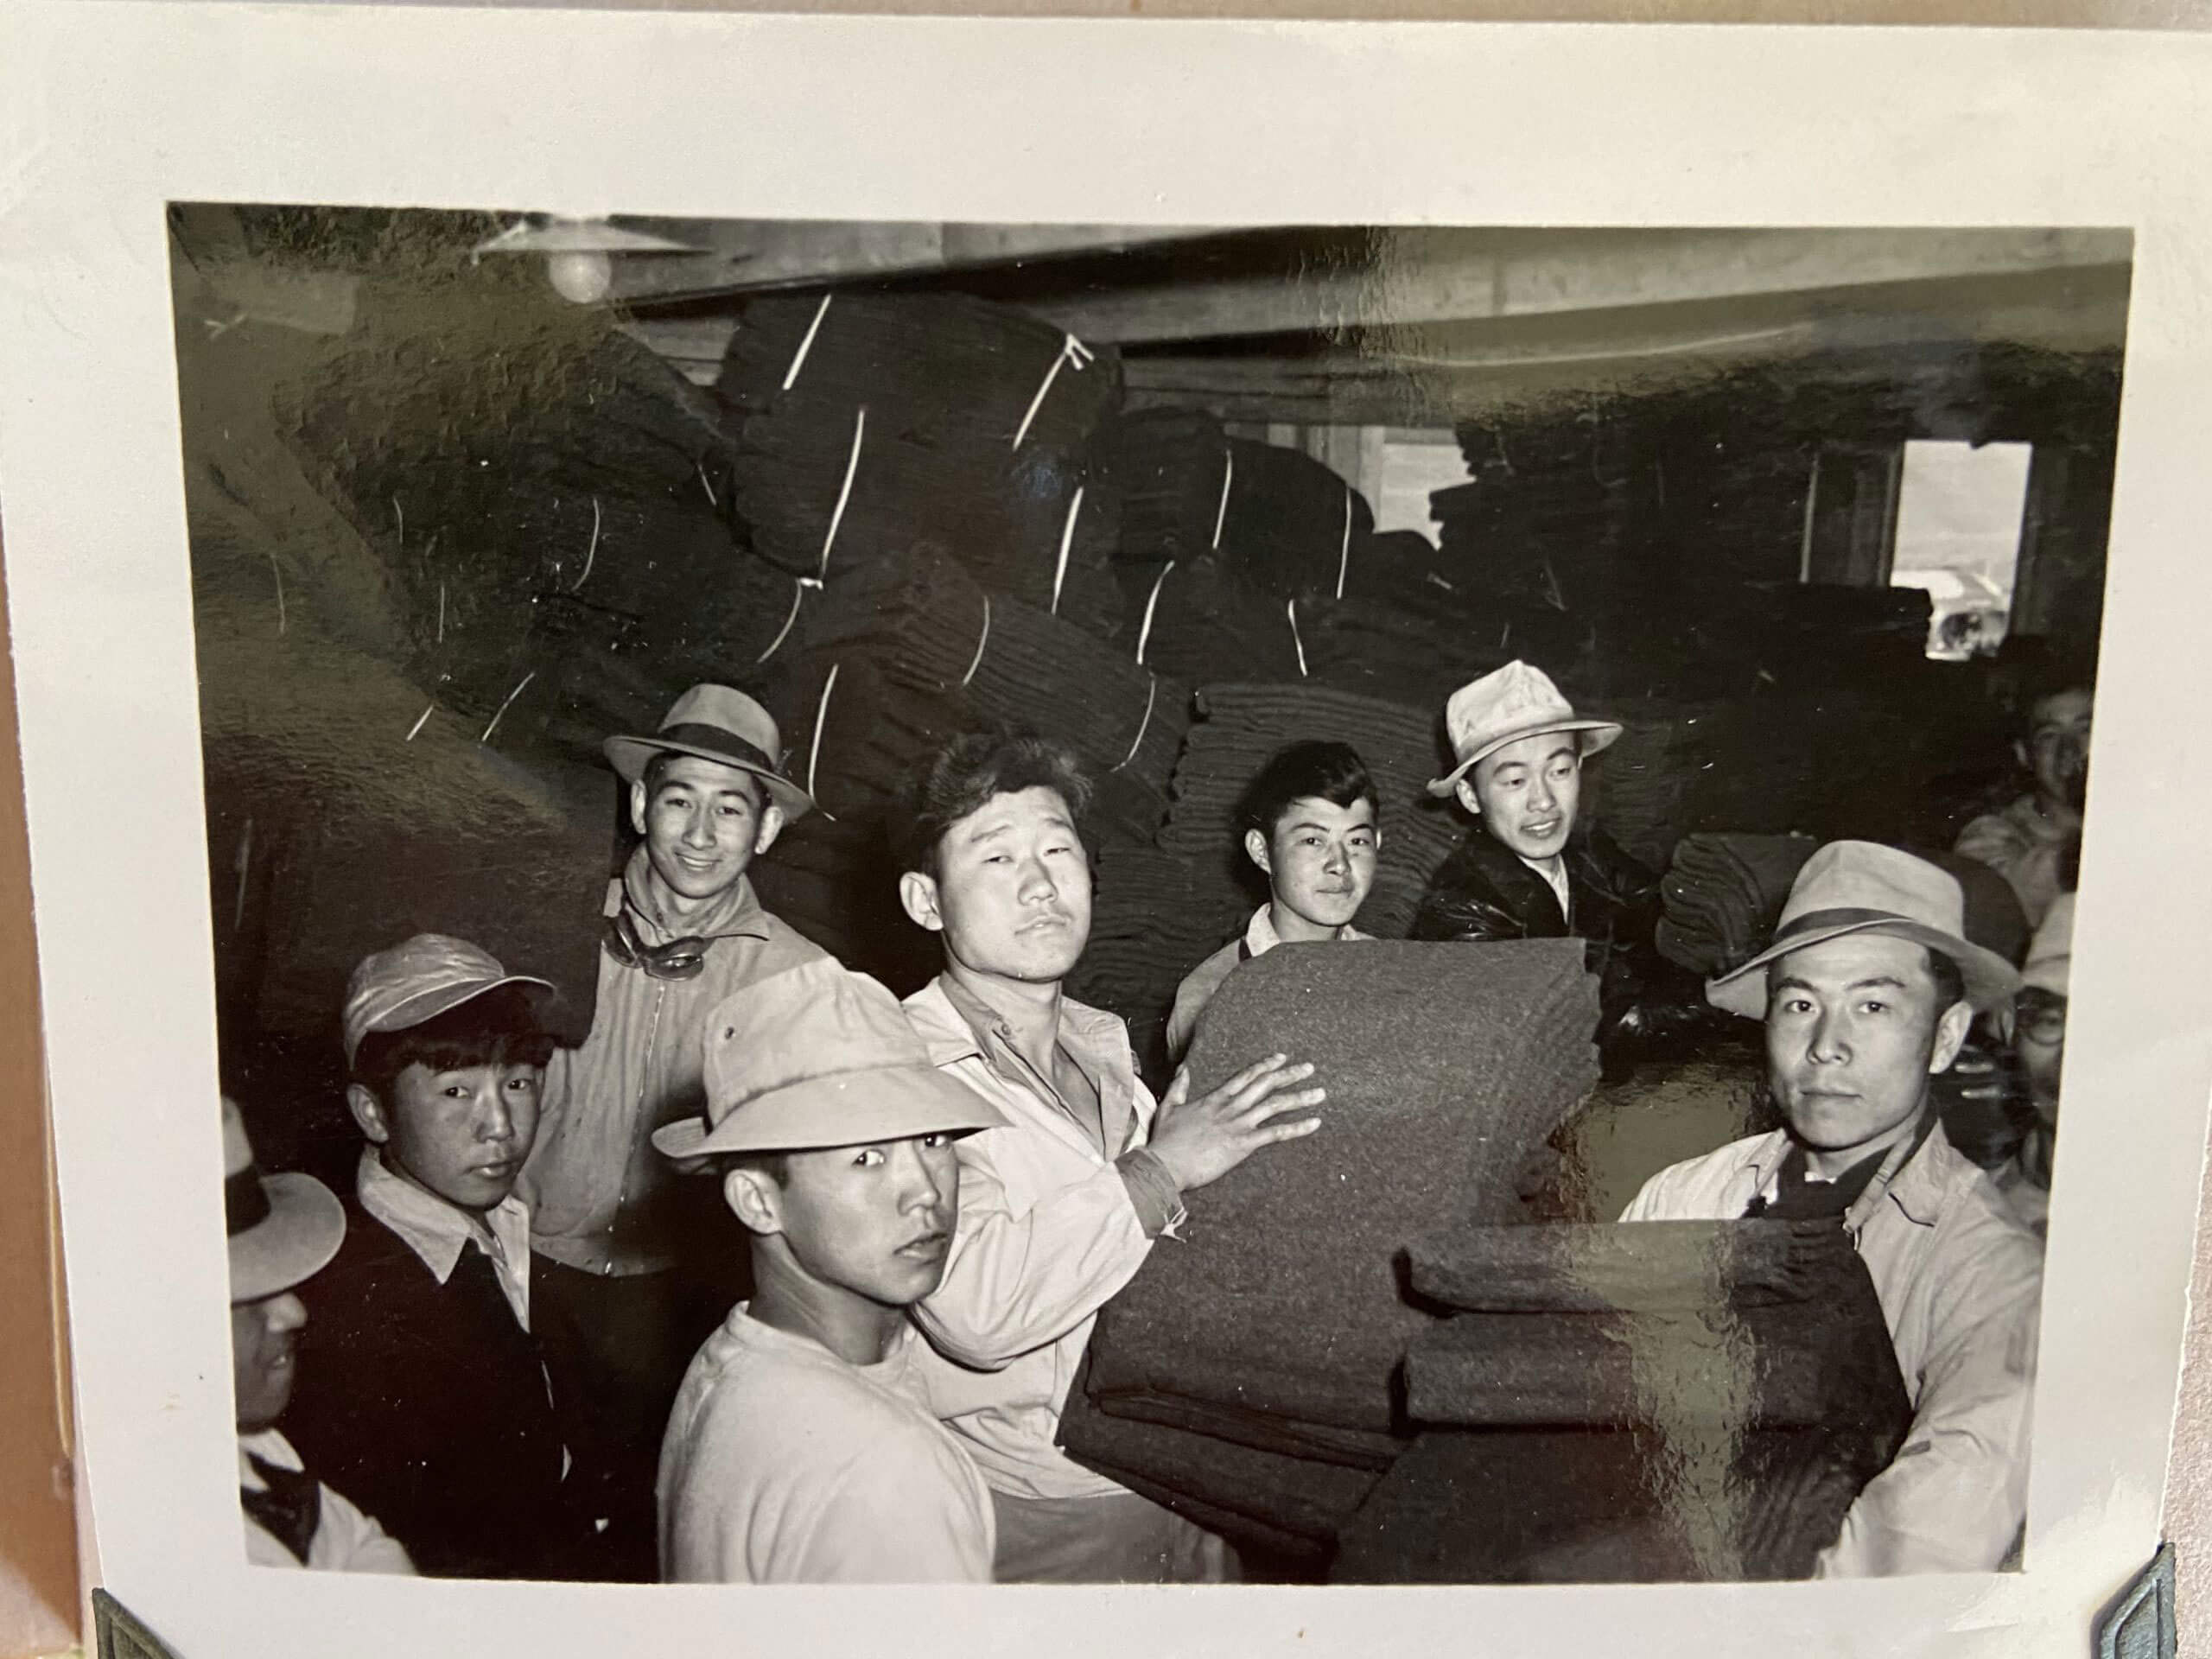 A photo from Bachi’s Manzanar album. The arrival of internees.